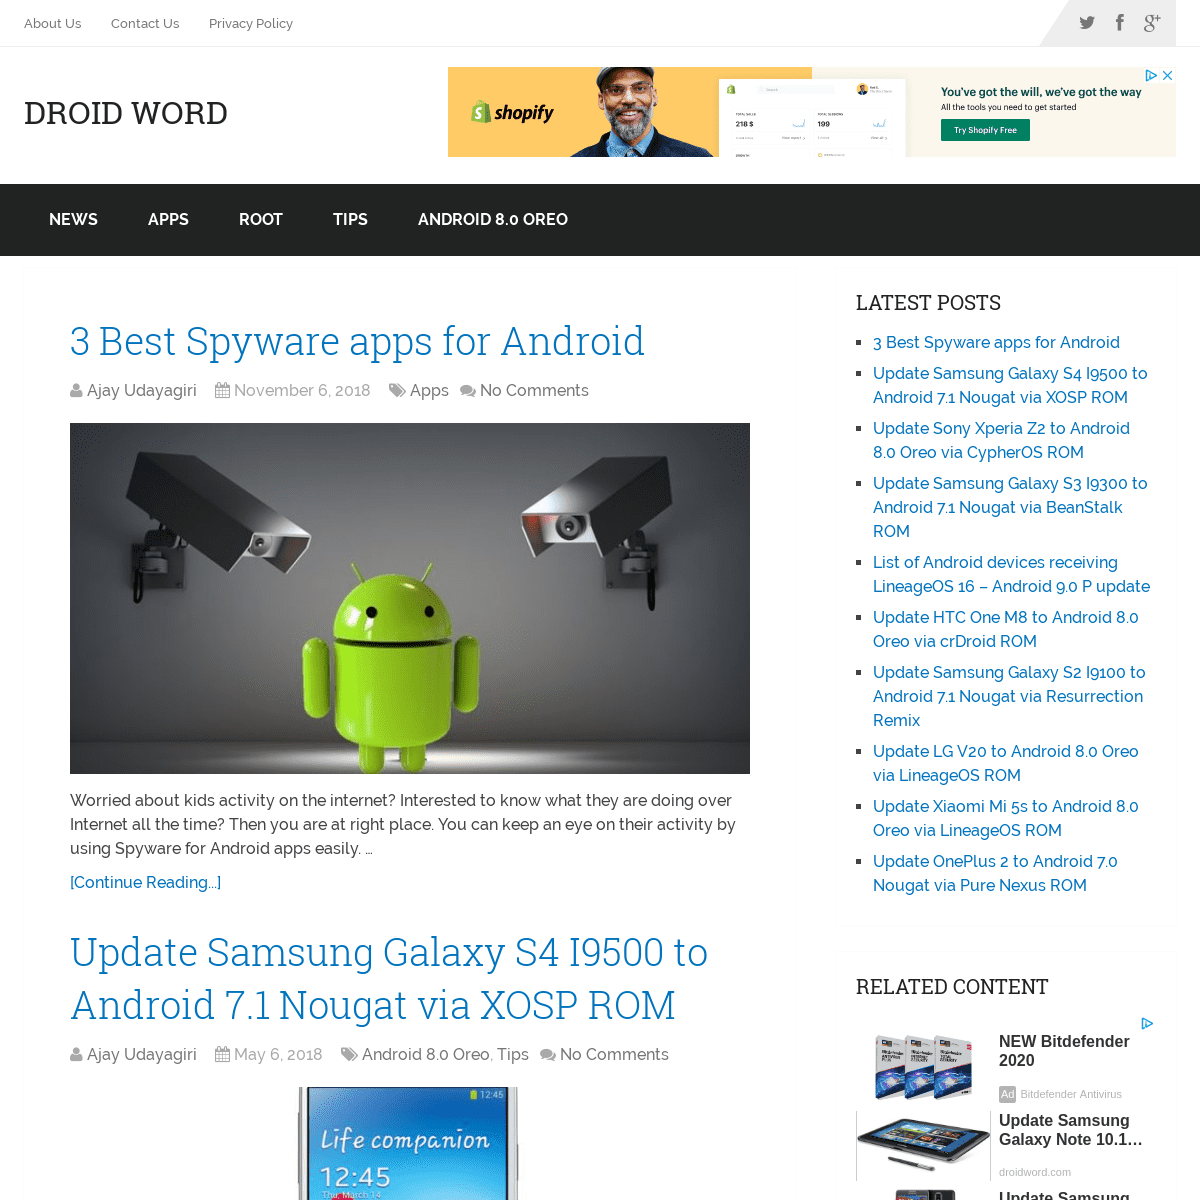 A complete backup of droidword.com